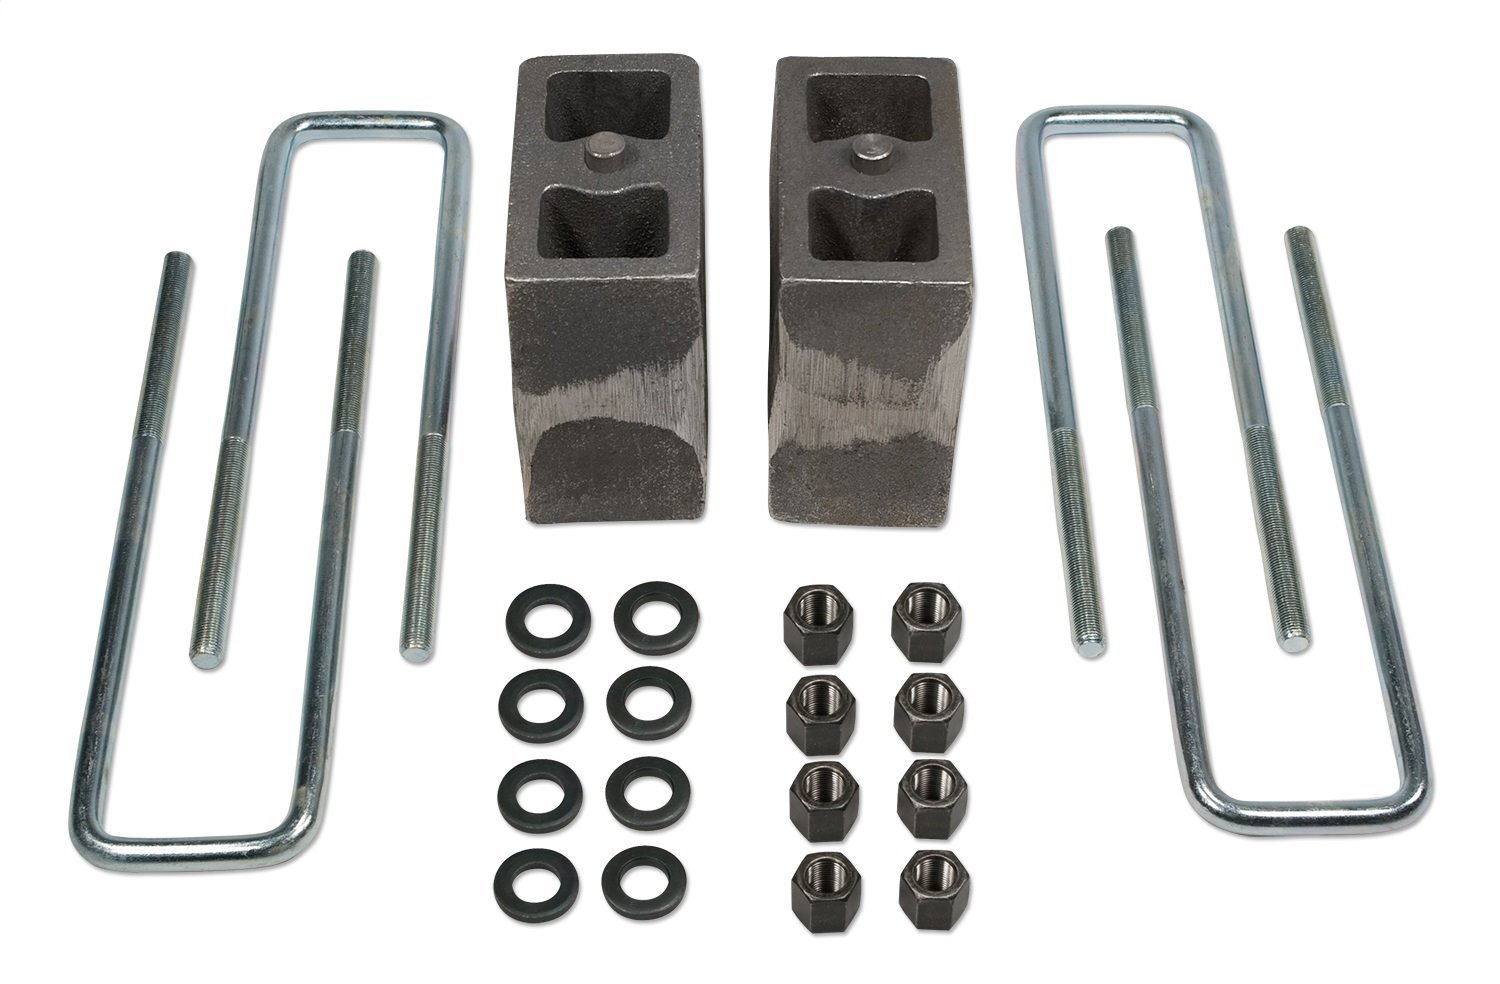 Axle Lift Blocks Kit 5.5 in. H x 3 in. W x 5.5 in. L Tapered w/Contact Ovrld Incl. U-Bolts Repl Fact Blks On Veh Equipd w/Them